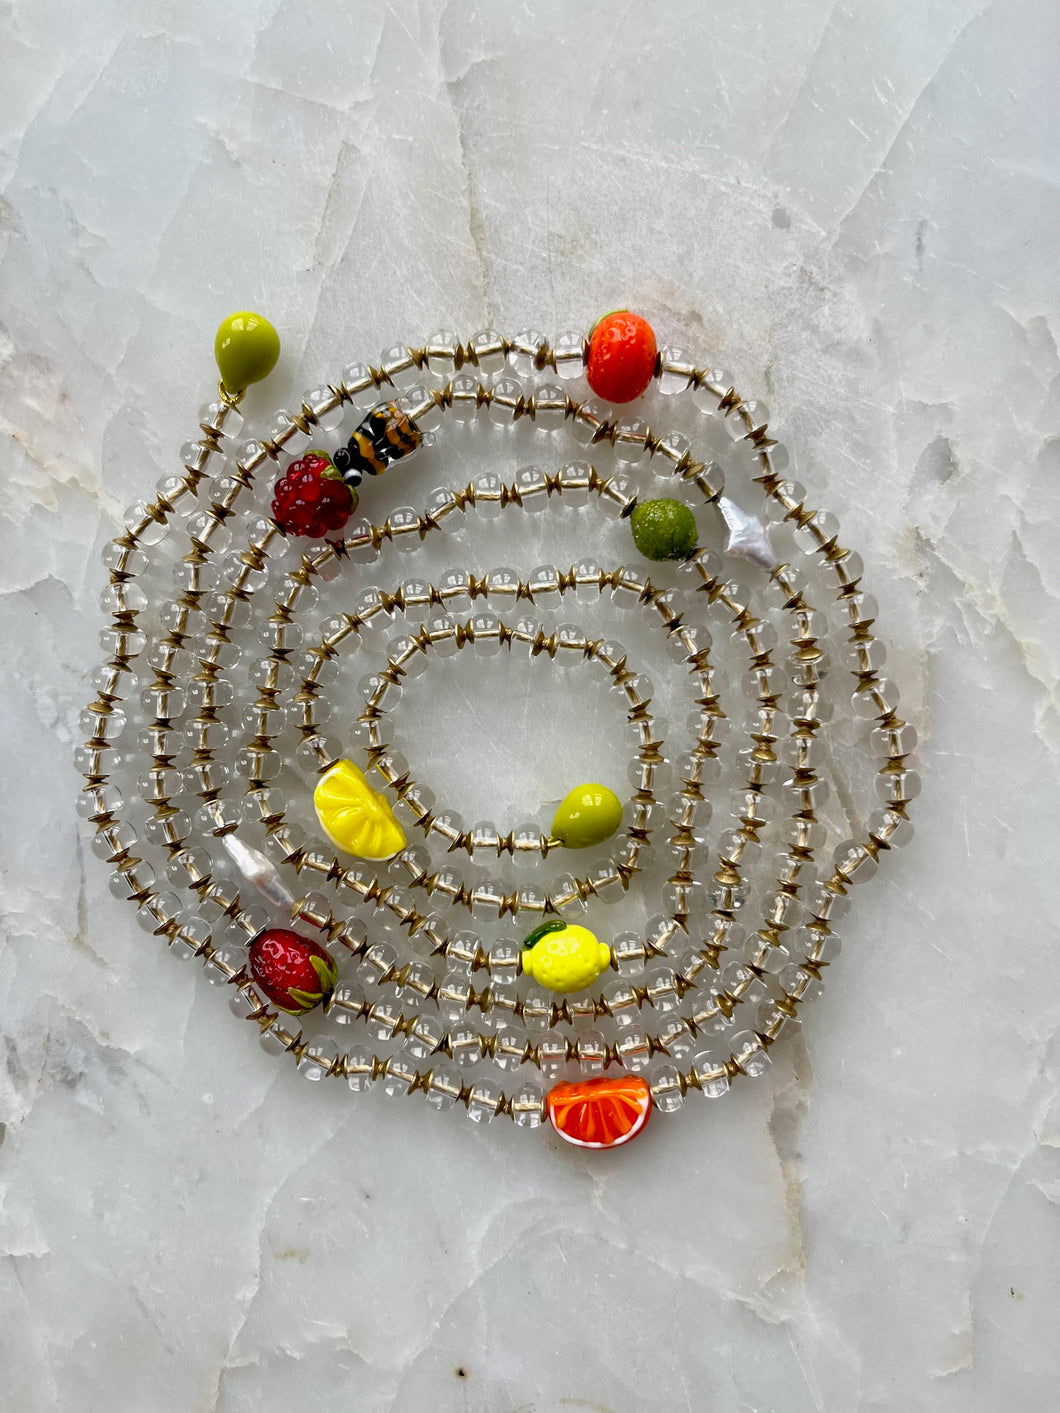 The Crystal Fruit Wrap necklace